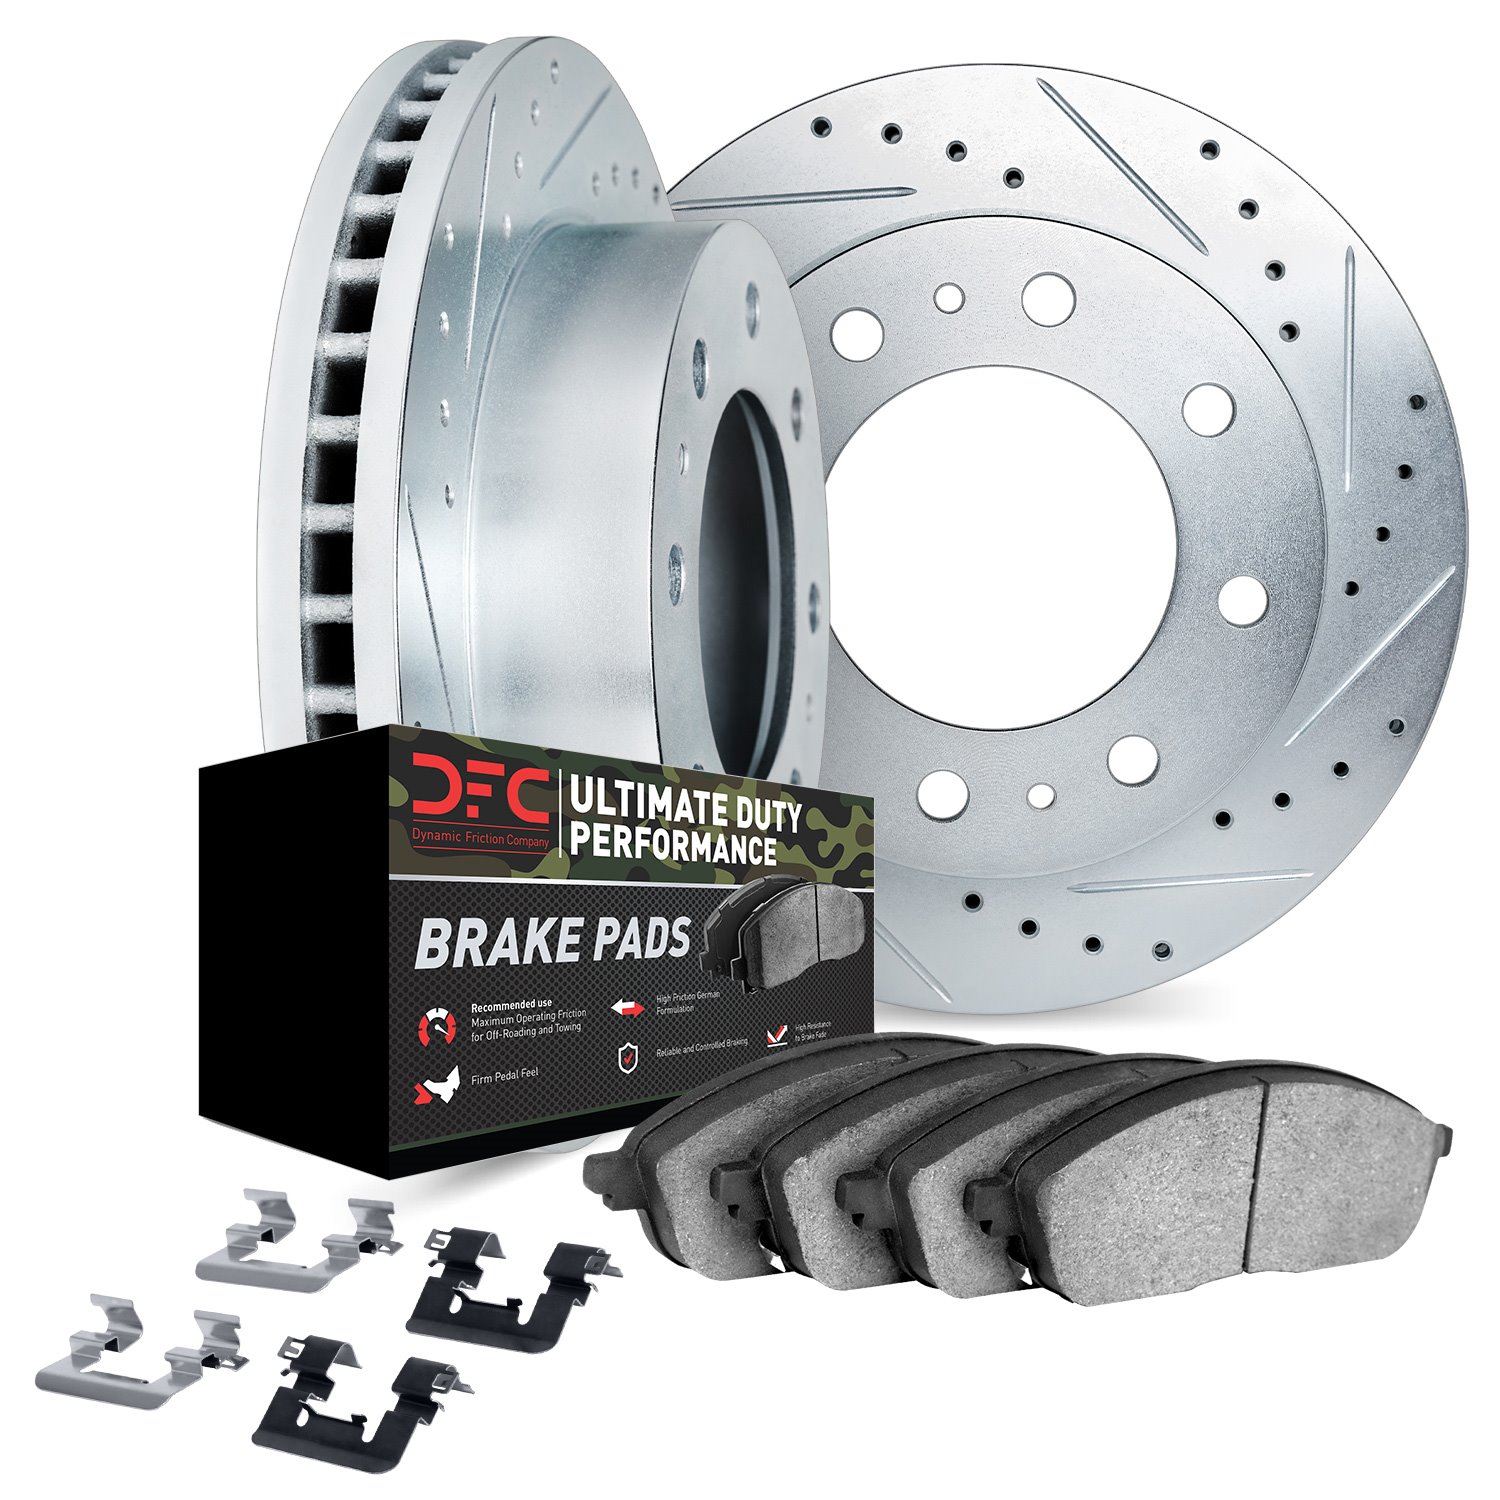 7412-54101 Drilled/Slotted Brake Rotors with Ultimate-Duty Brake Pads Kit & Hardware [Silver], Fits Select Ford/Lincoln/Mercury/